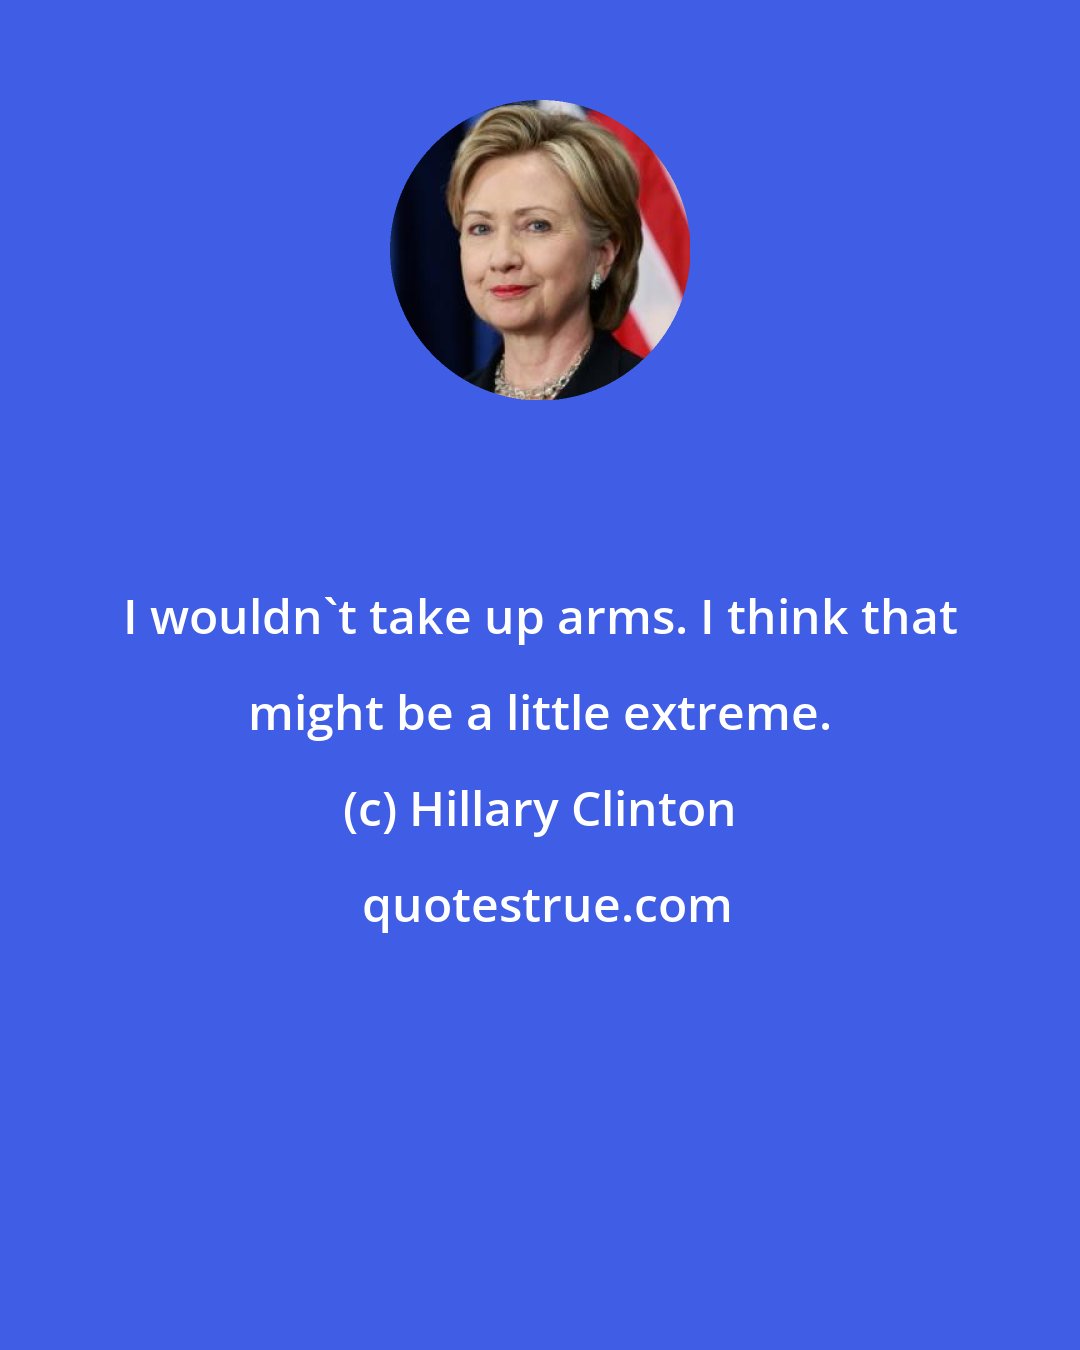 Hillary Clinton: I wouldn't take up arms. I think that might be a little extreme.